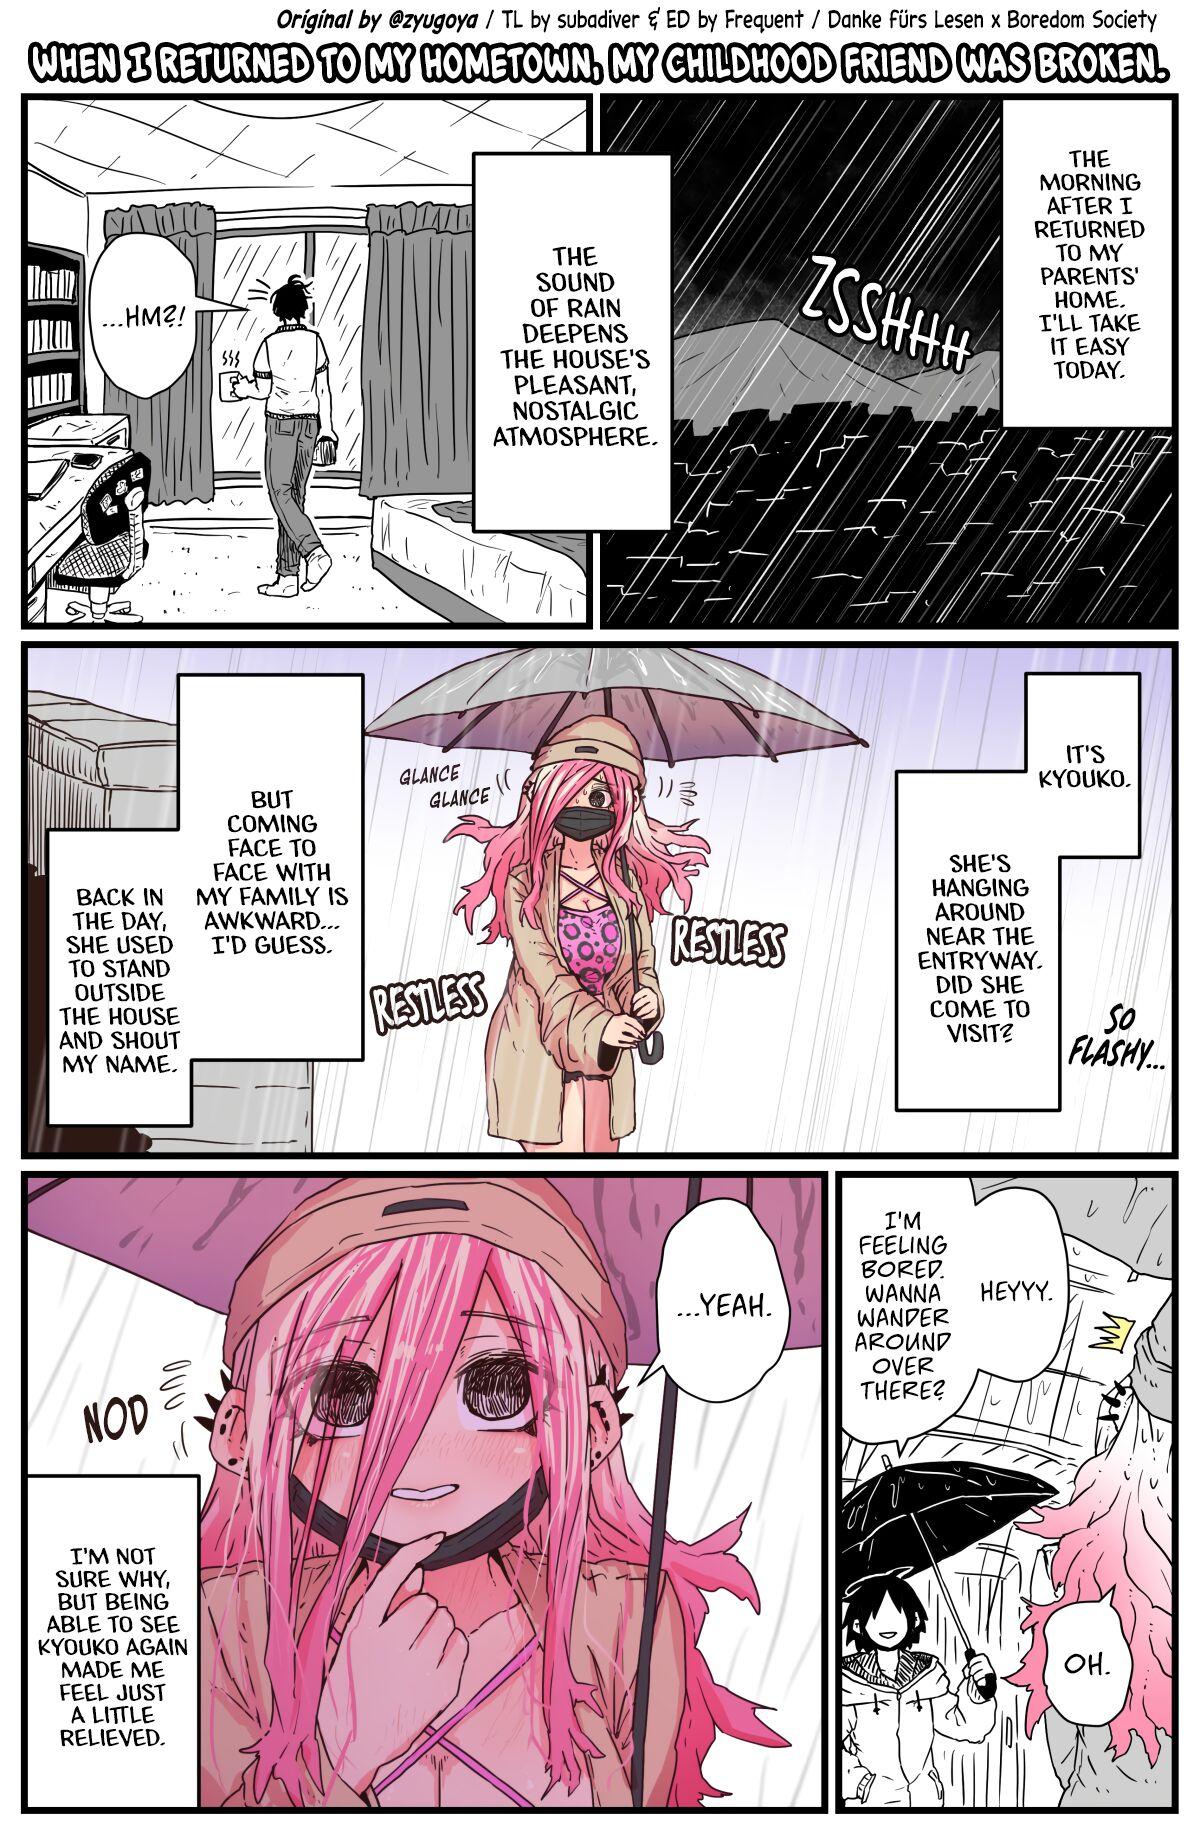 Taboo When I Returned to My Hometown, My Childhood Friend was Broken - Original Tites - Page 5